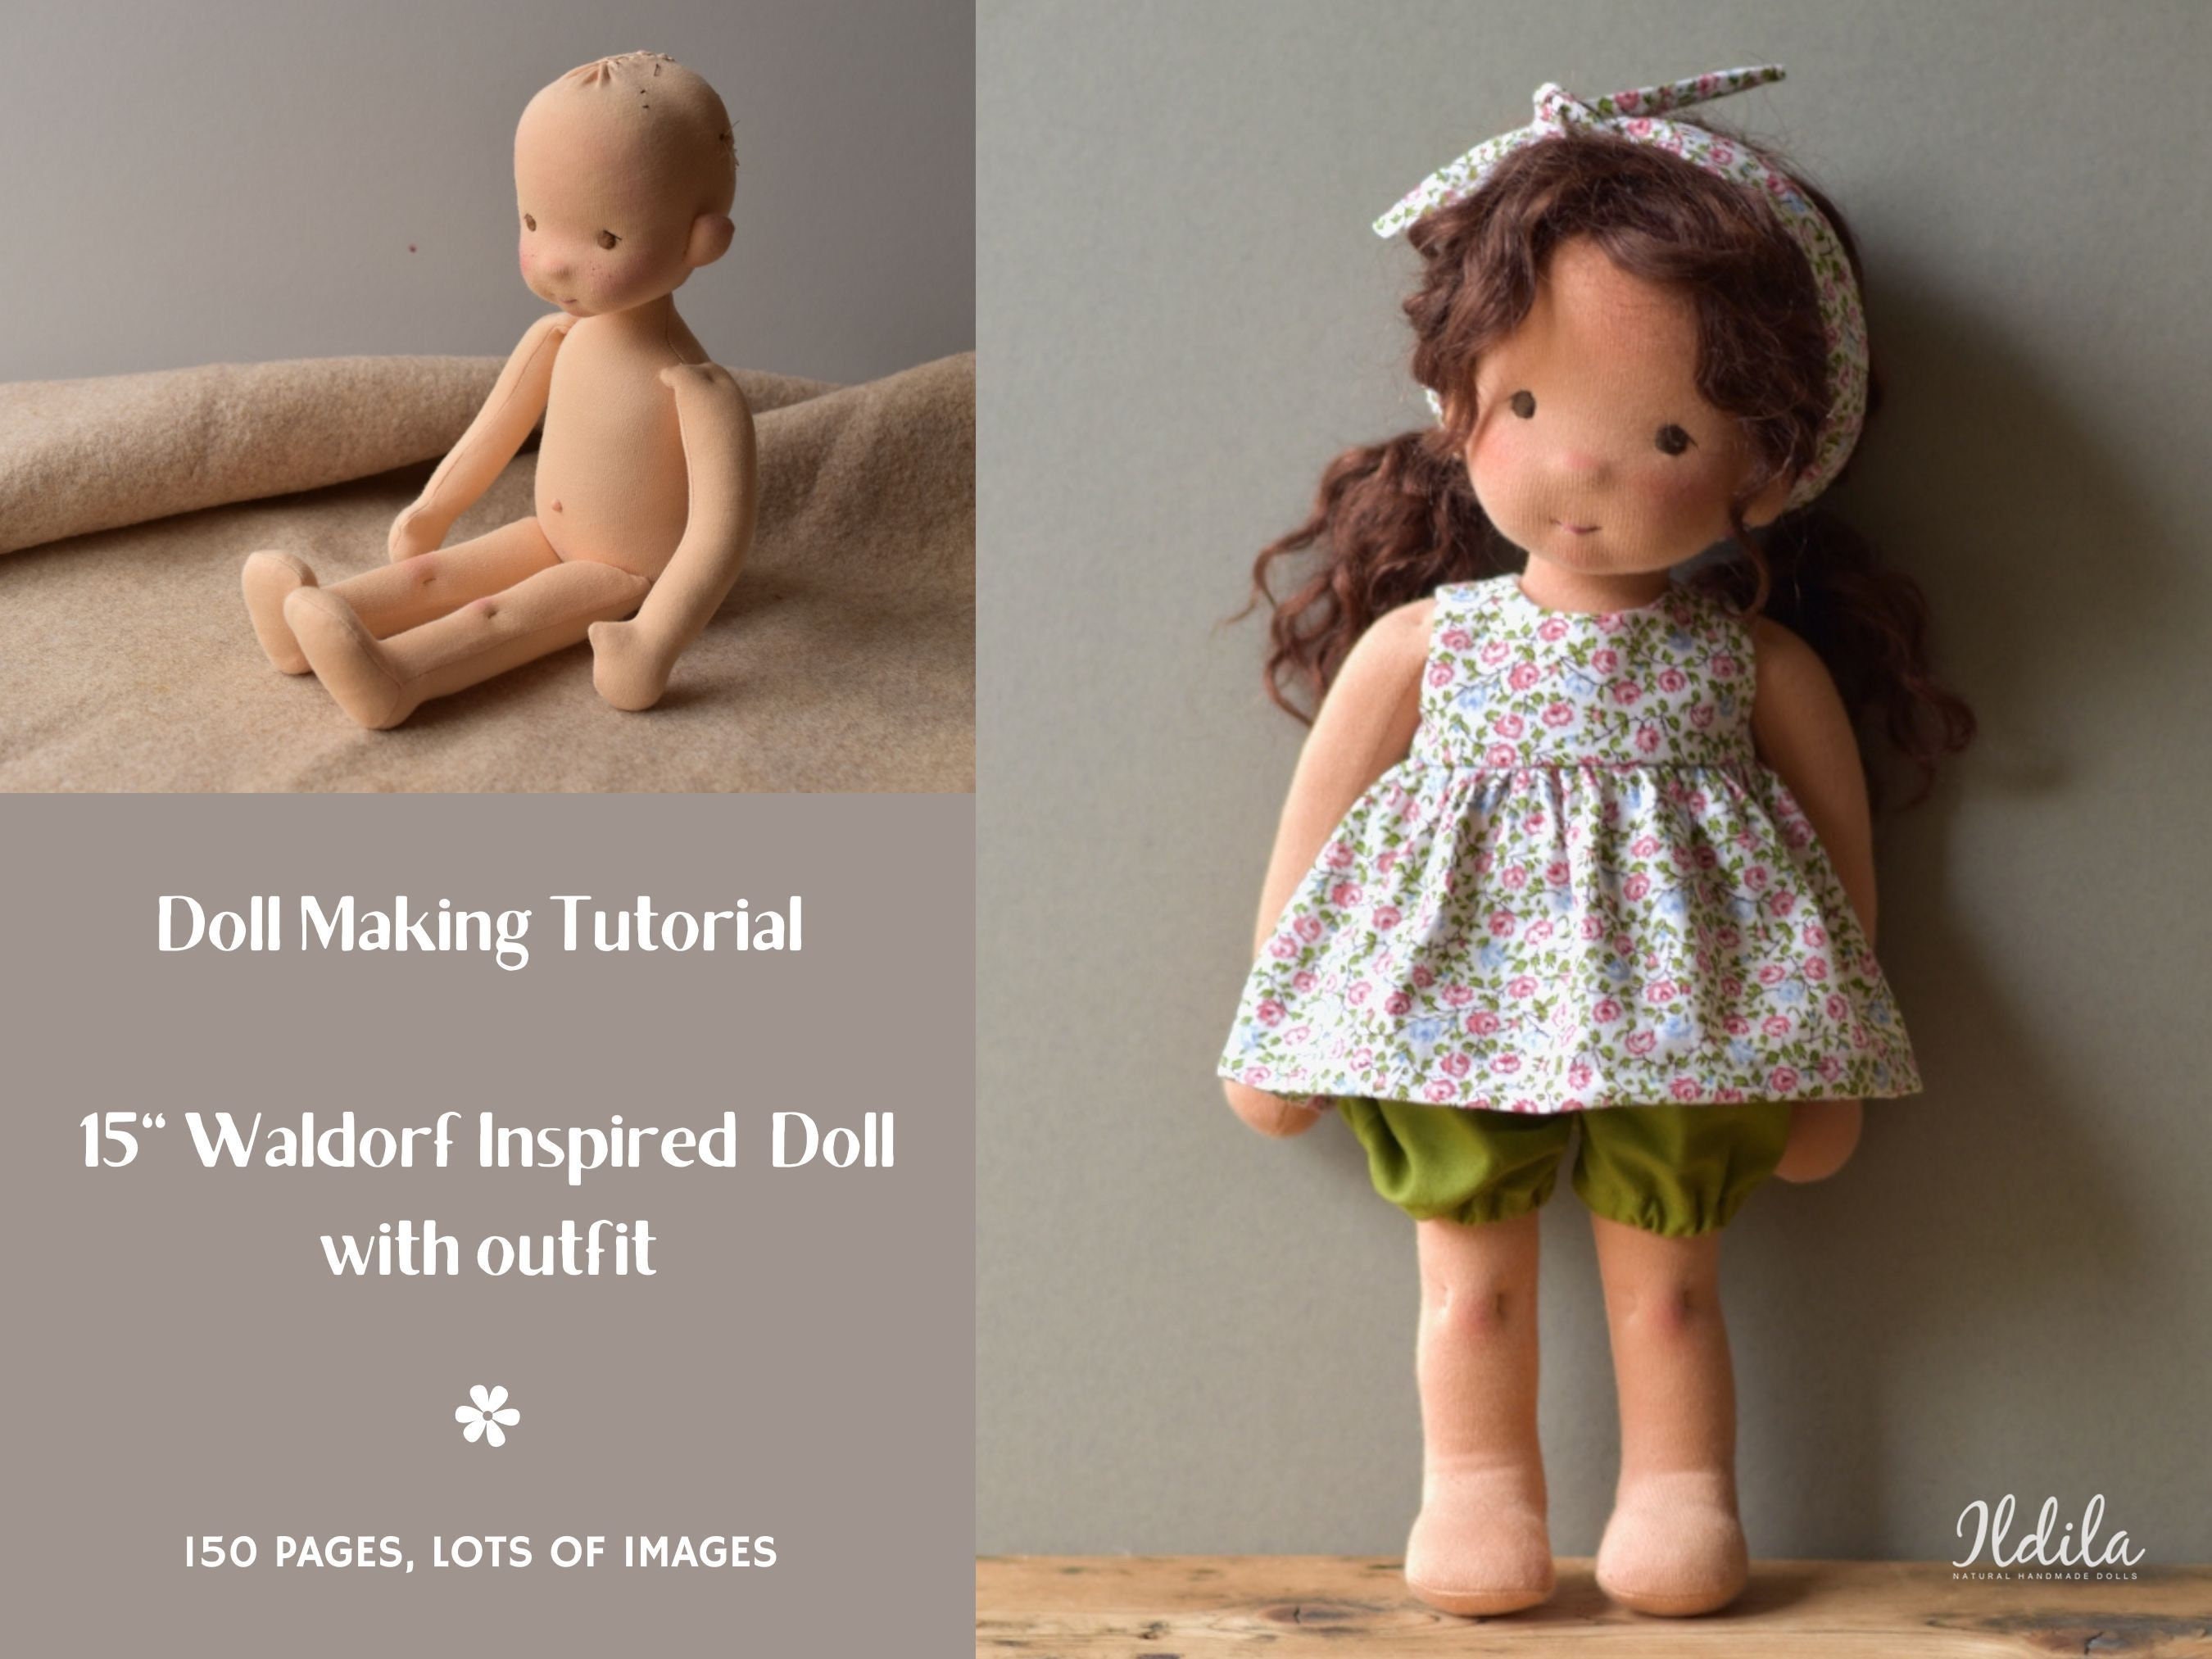 DIY Waldorf Inspired Cloth Doll Making Kit, Organic Rag Doll Making Kit  With Doll Patterns With Instruction Video, Cuddle Toy Kit for Baby 